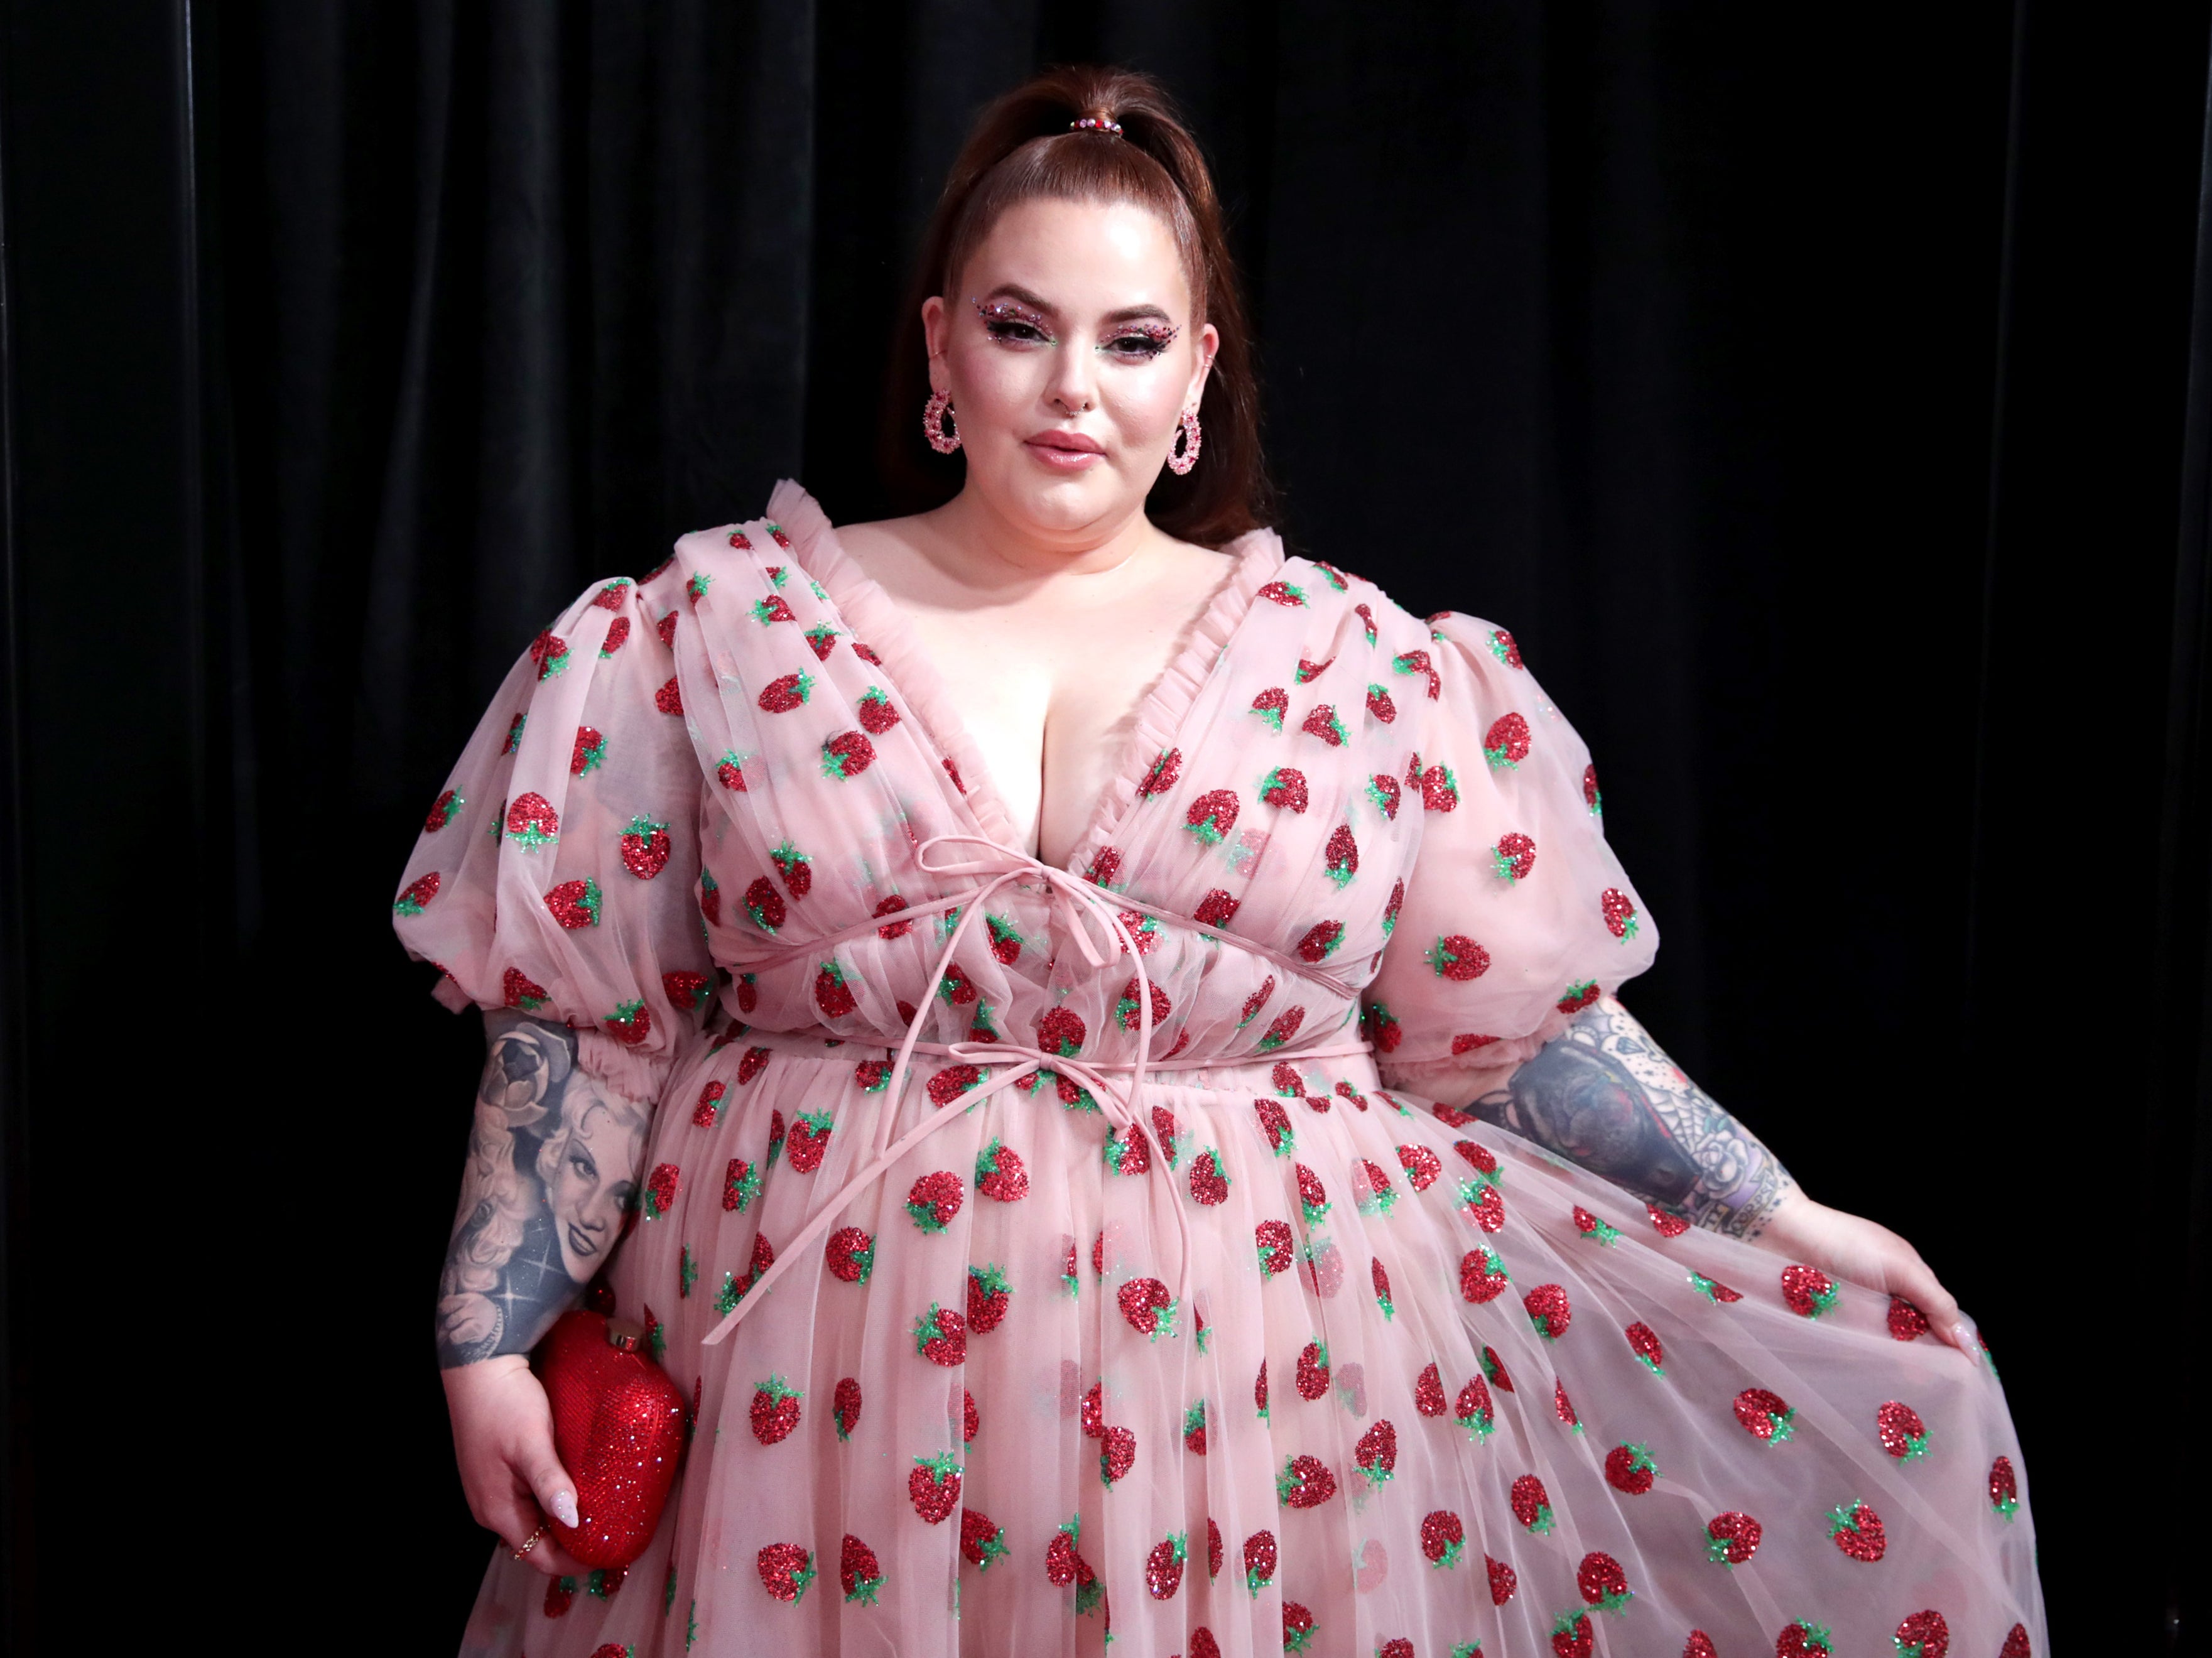 Plus-size model Tess Holliday reveals she is suffering from